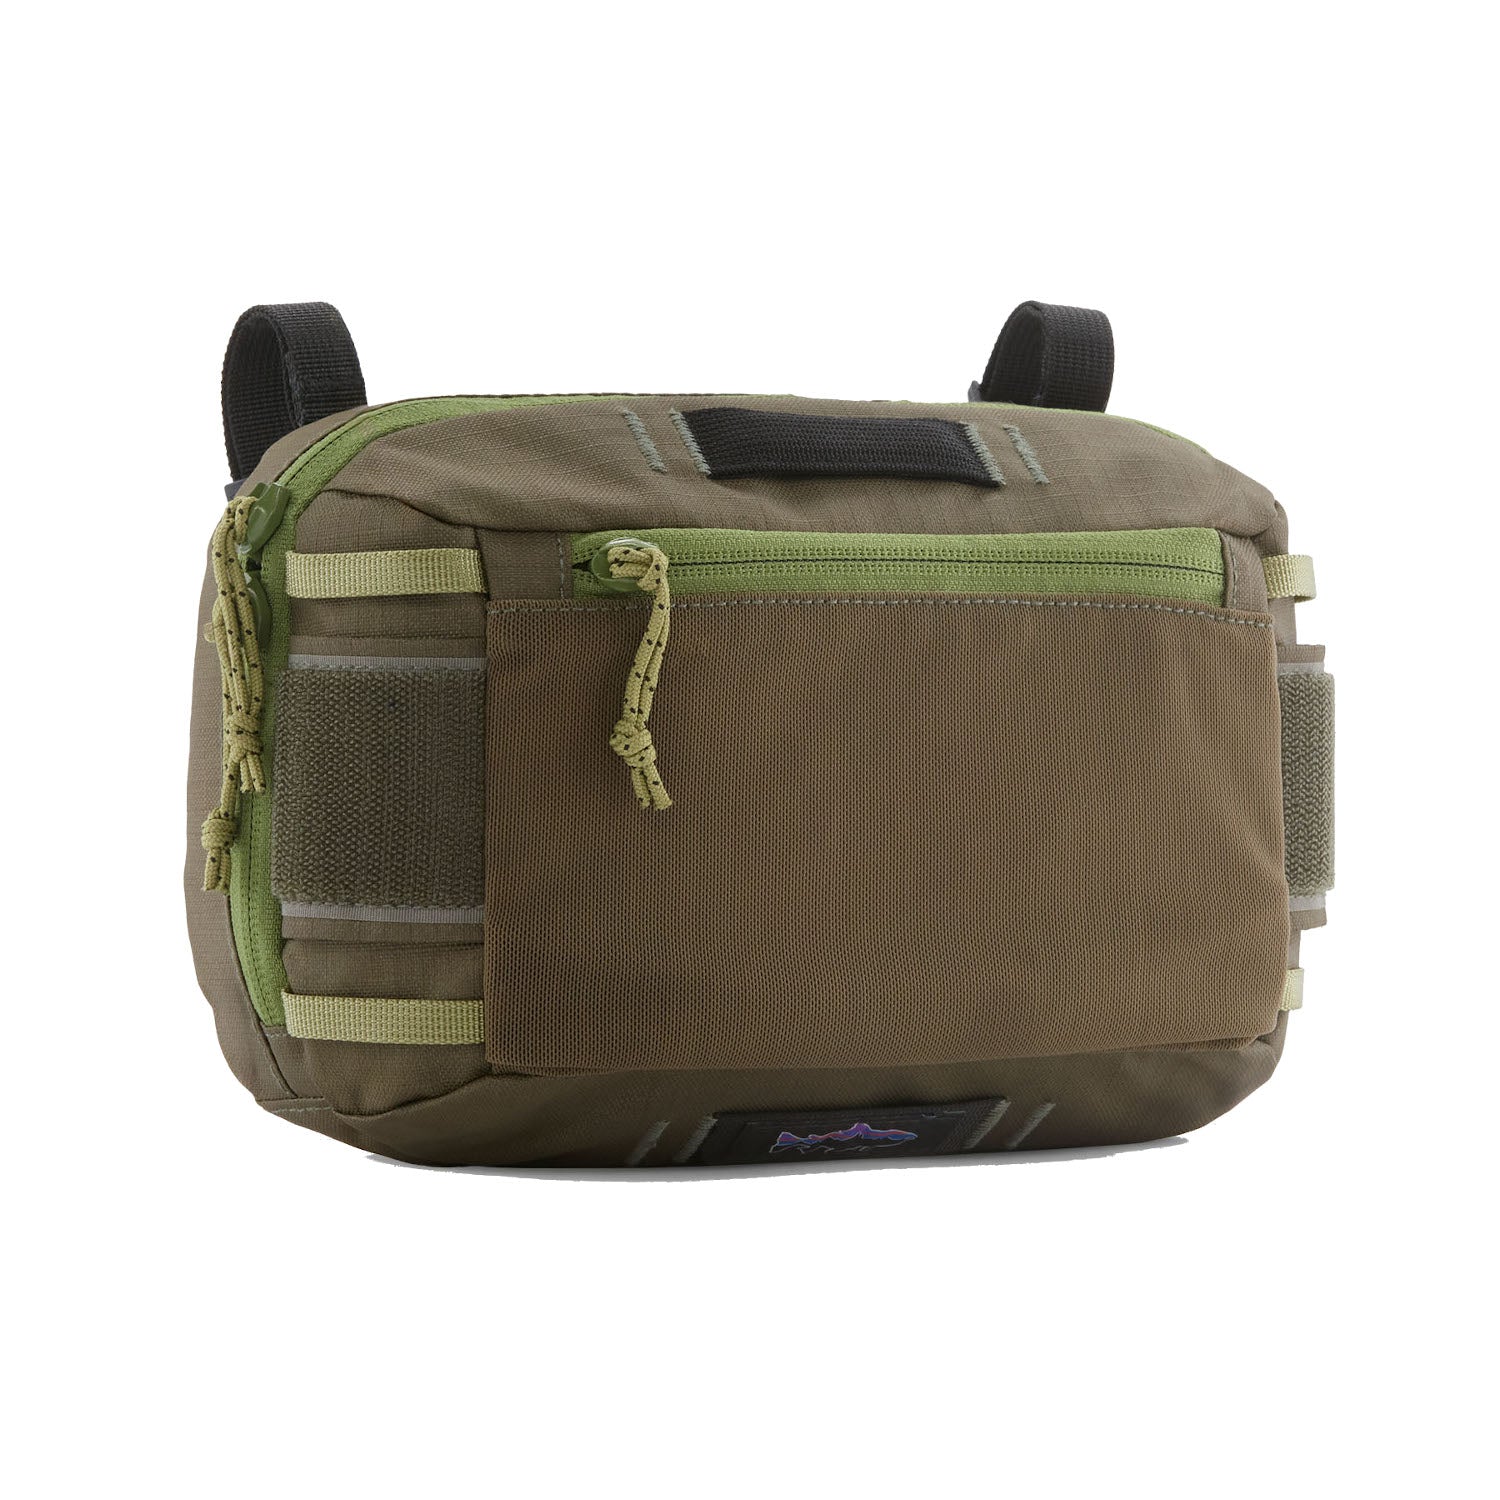 Patagonia Stealth Hip Pack 11L - Fly Fishing Waist Pack in Basin Green